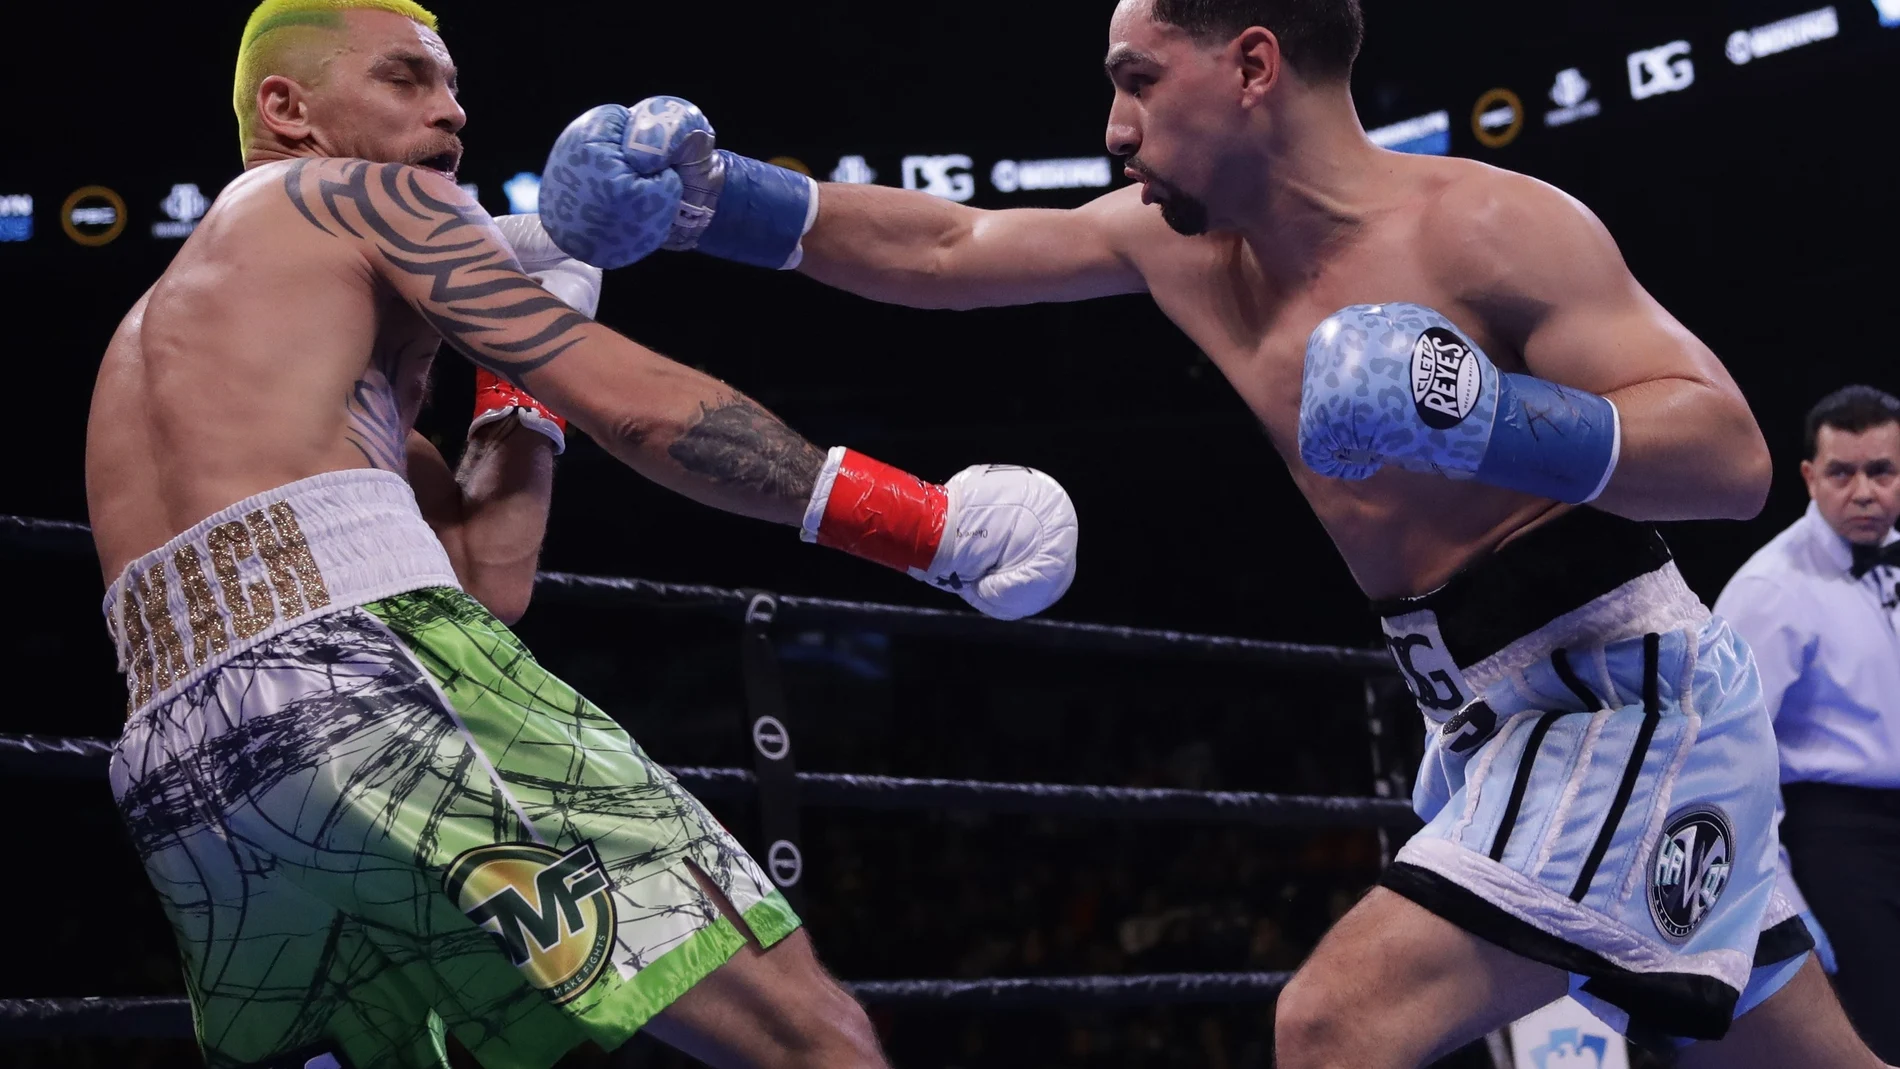 Danny Garcia punches Ukraine's Ivan Redkach during the second round of a welterweight boxing match Saturday, Jan. 25, 2020, in New York. Garcia won the fight. (AP Photo/Frank Franklin II)